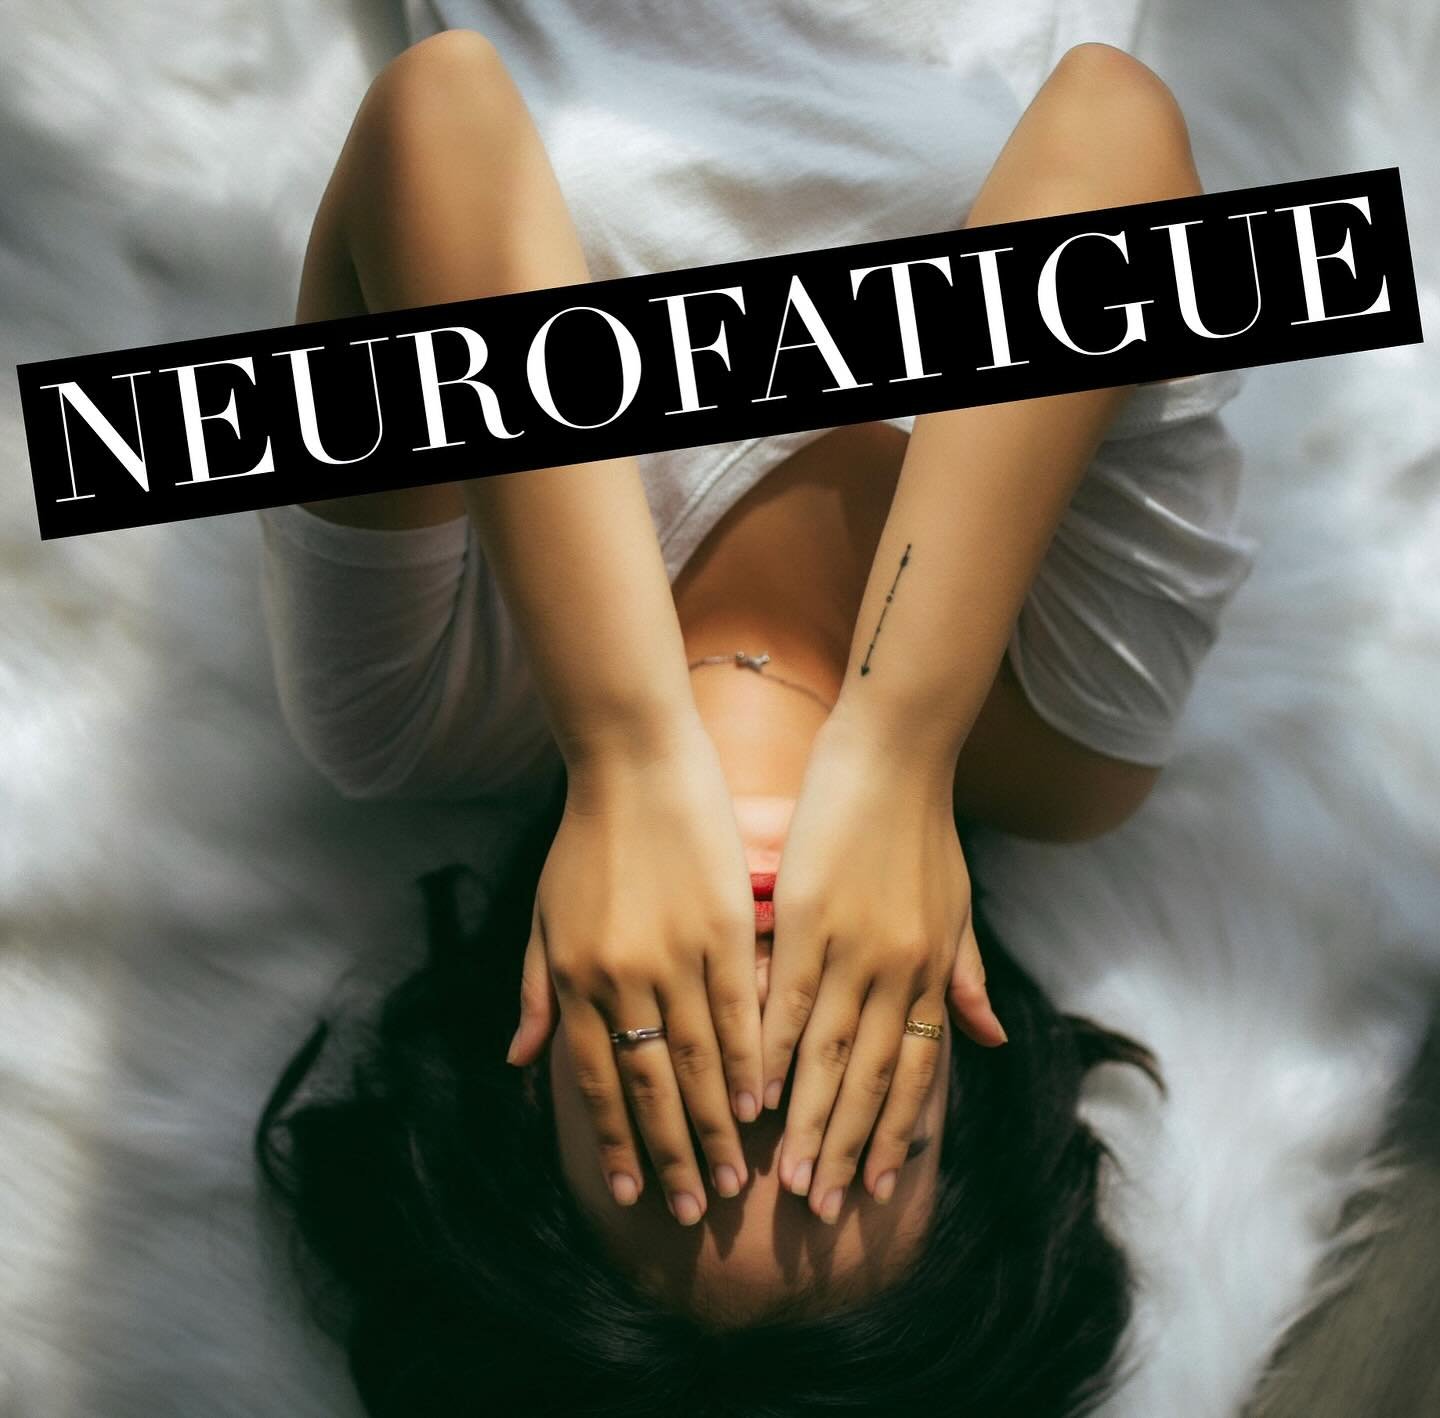 Who is tired? ✋✋✋

Many stroke survivors and other people with brain injuries deal with neurofatigue on a daily basis.

What is neurofatigue?

&ldquo;Neurofatigue, neurological fatigue, or mental fatigue, is a decrease in concentration, focus, memory